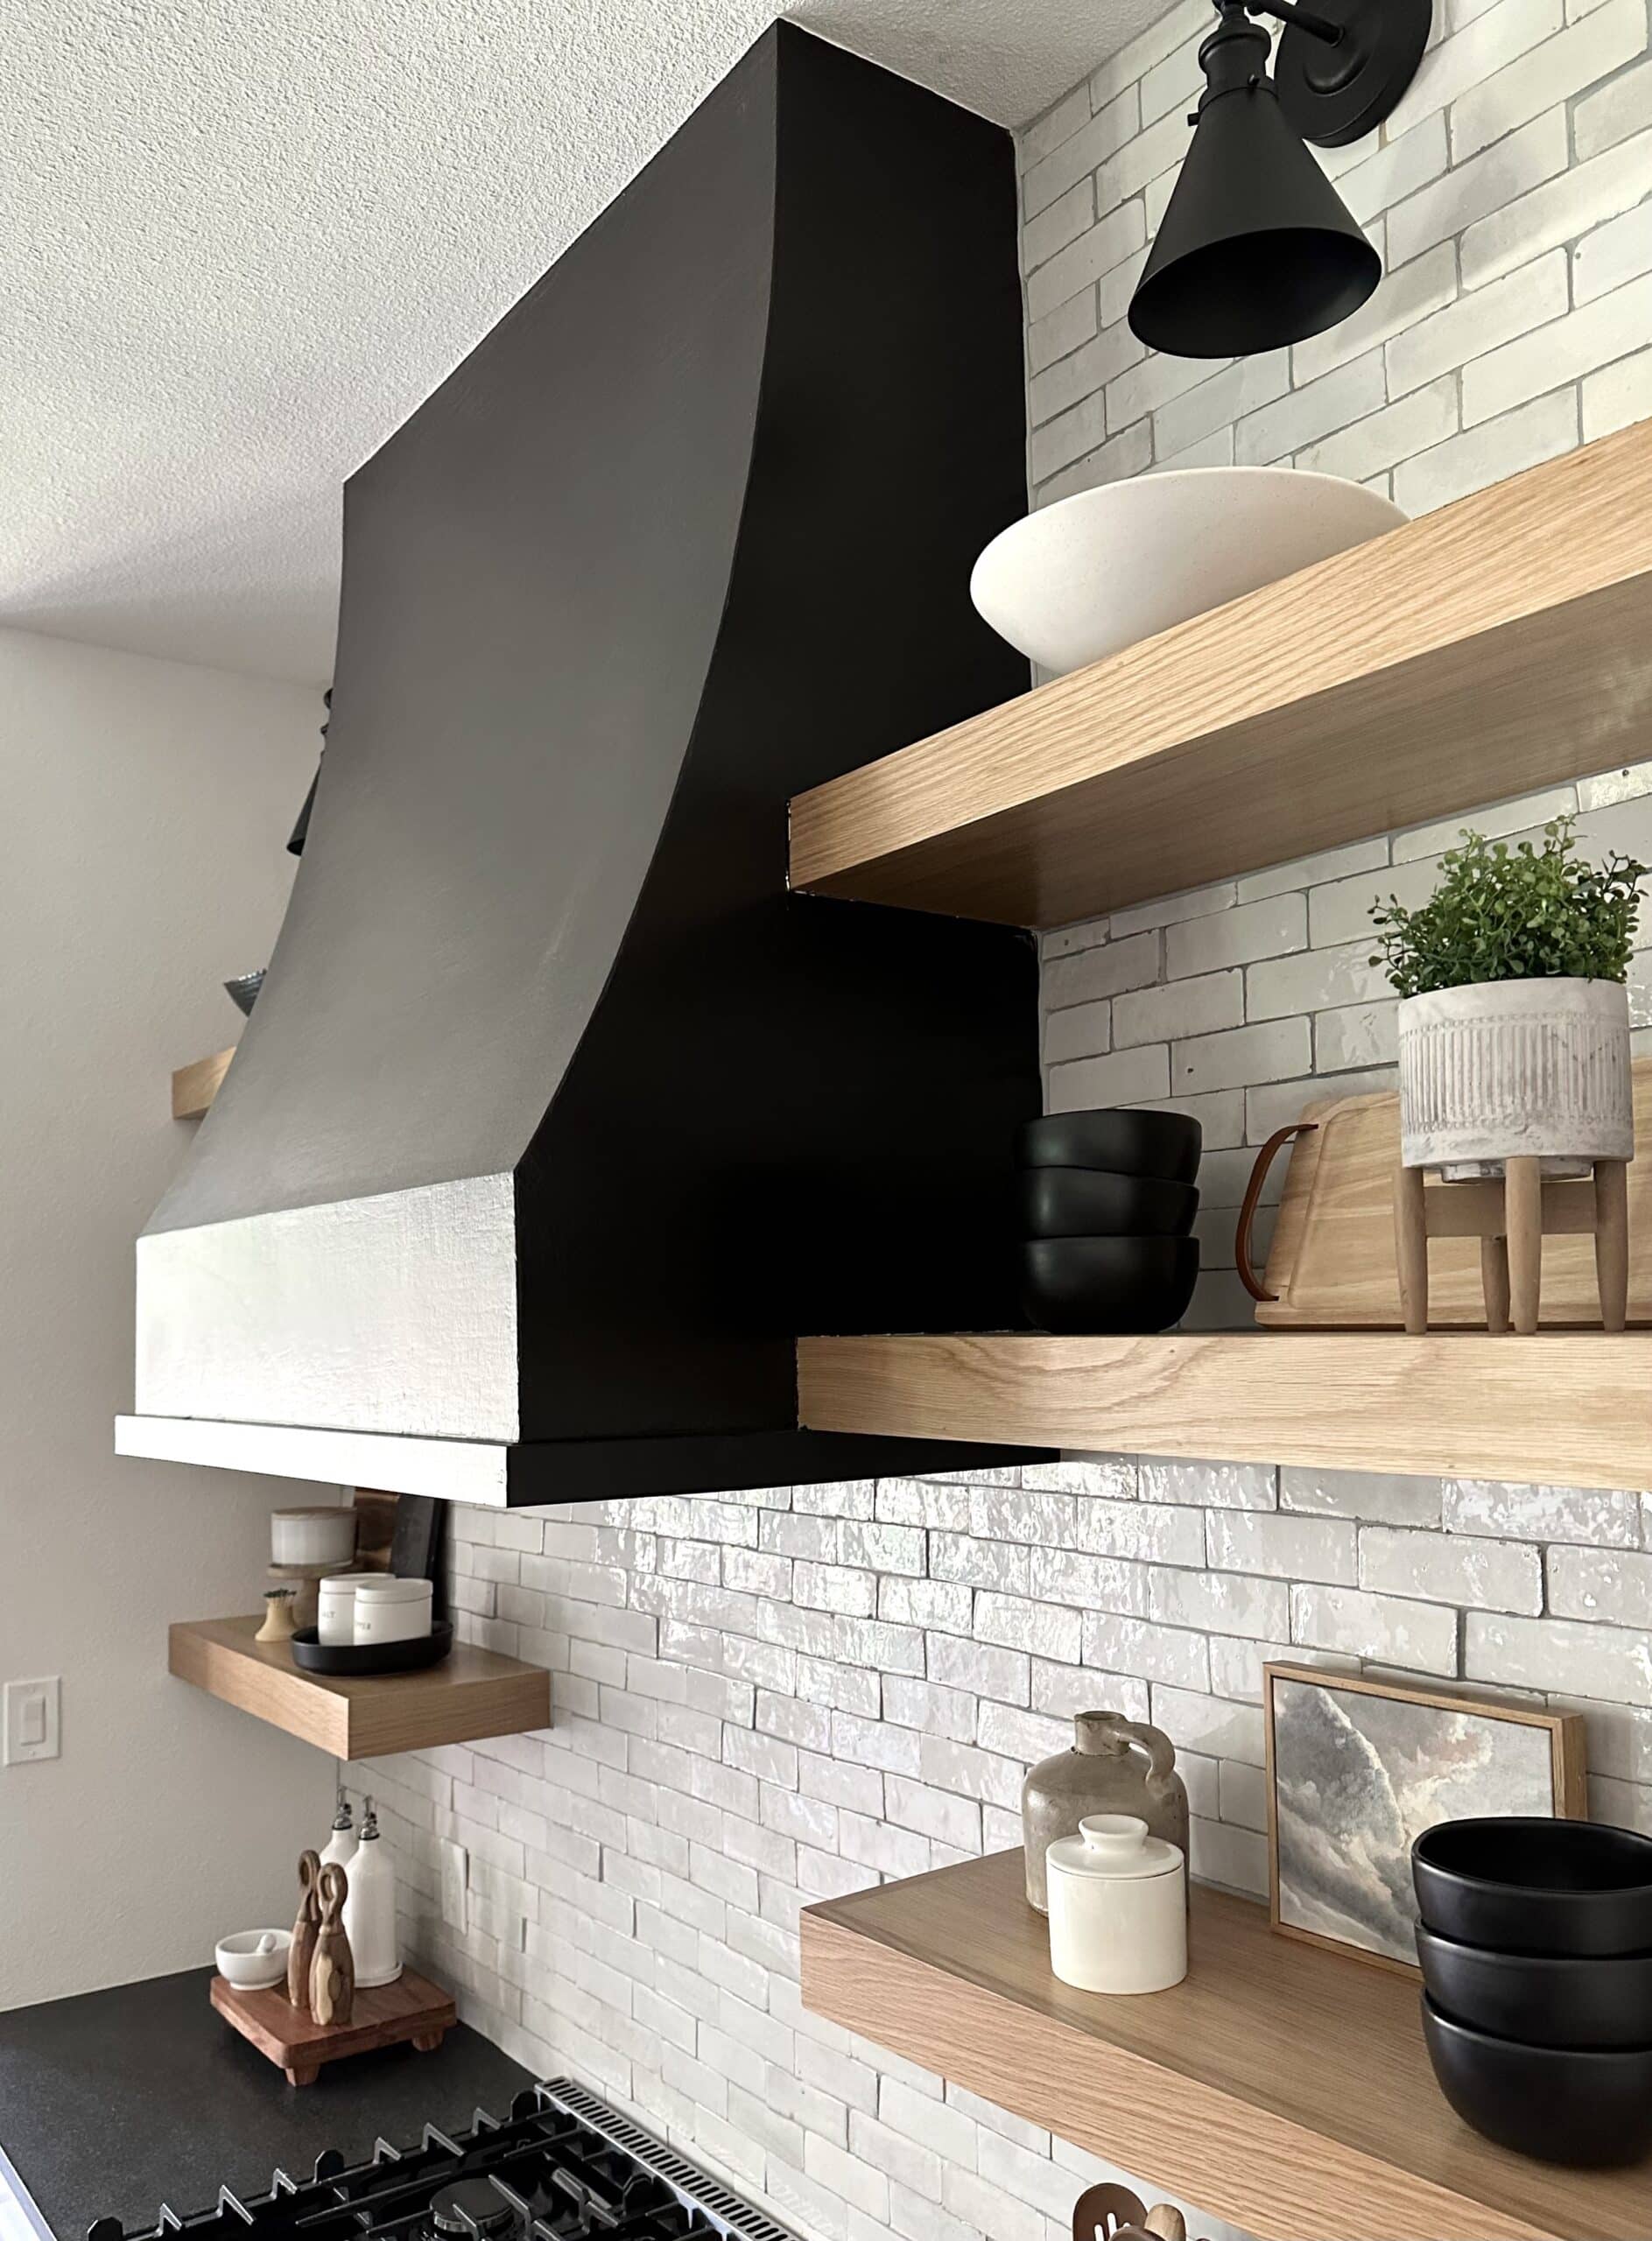 How to Build and Install a DIY Kitchen Vent Hood